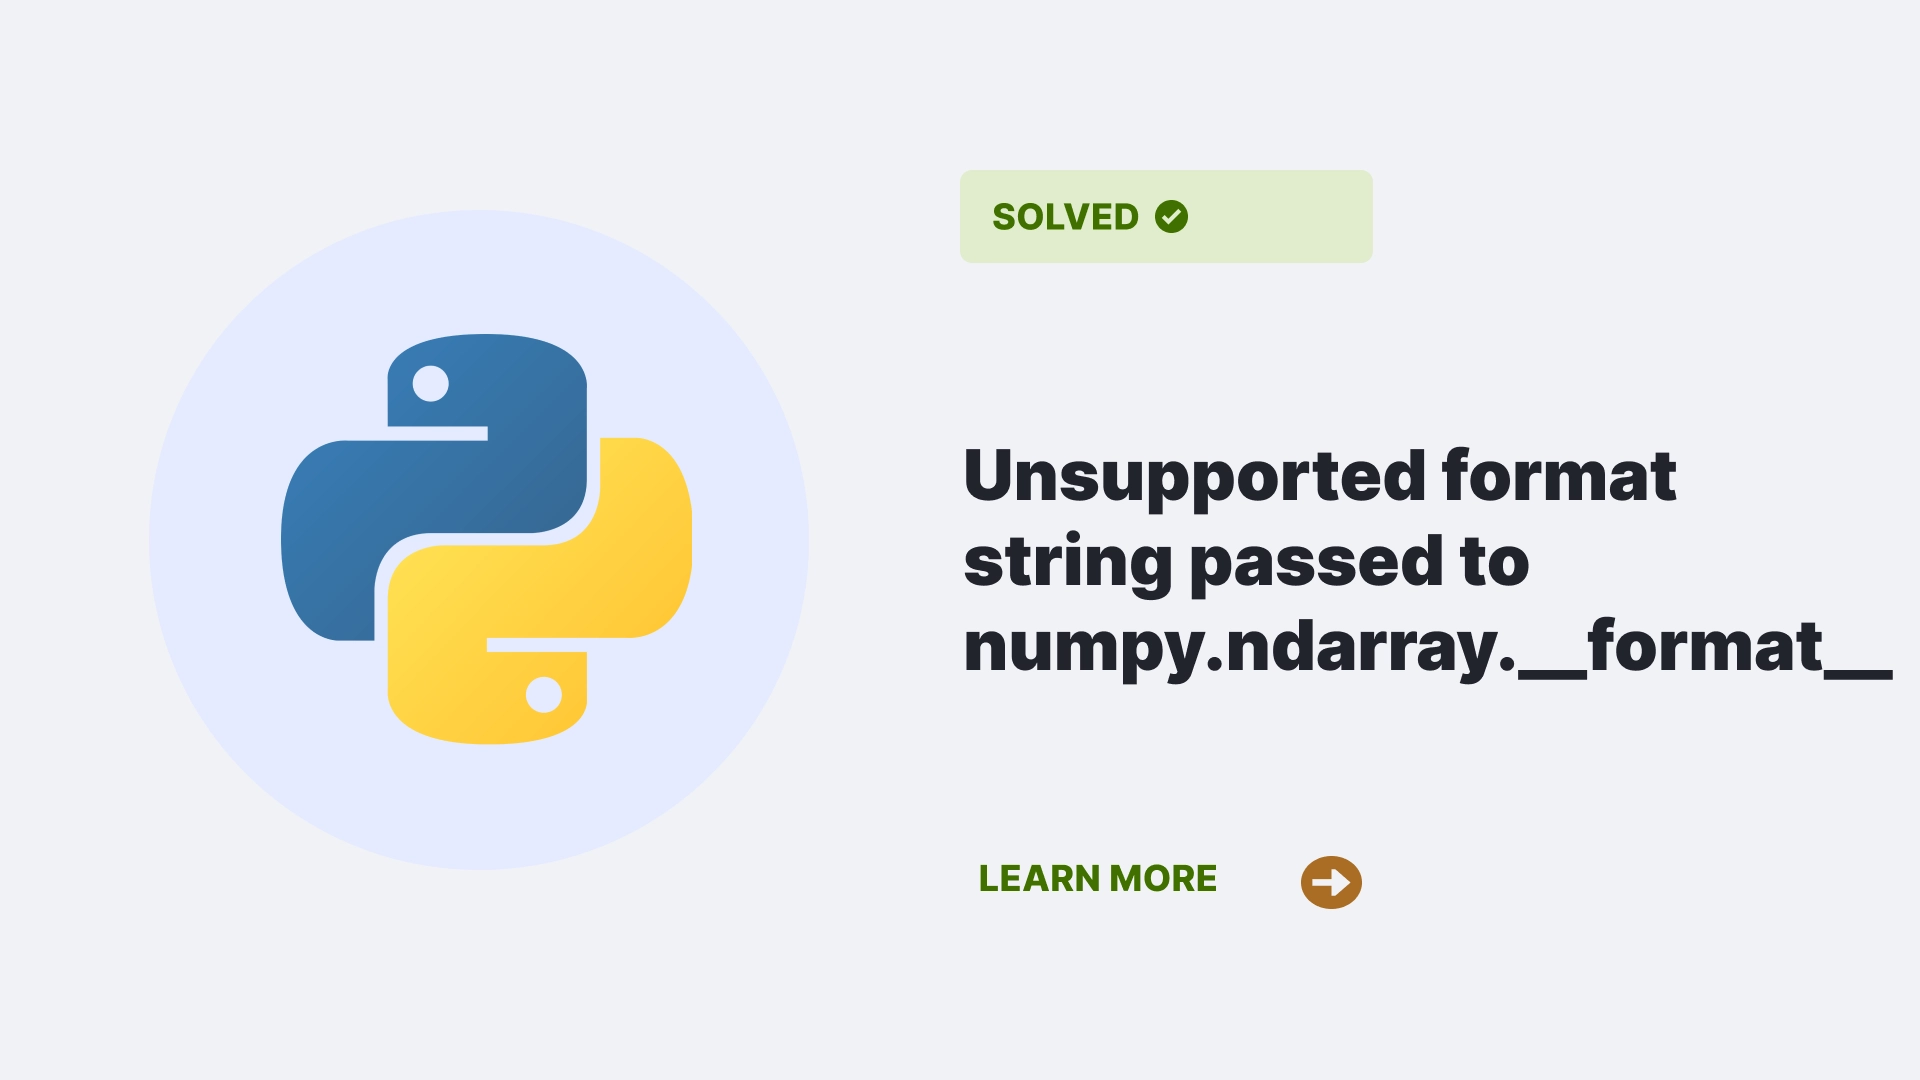 Unsupported format string passed to numpy.ndarray.__format__